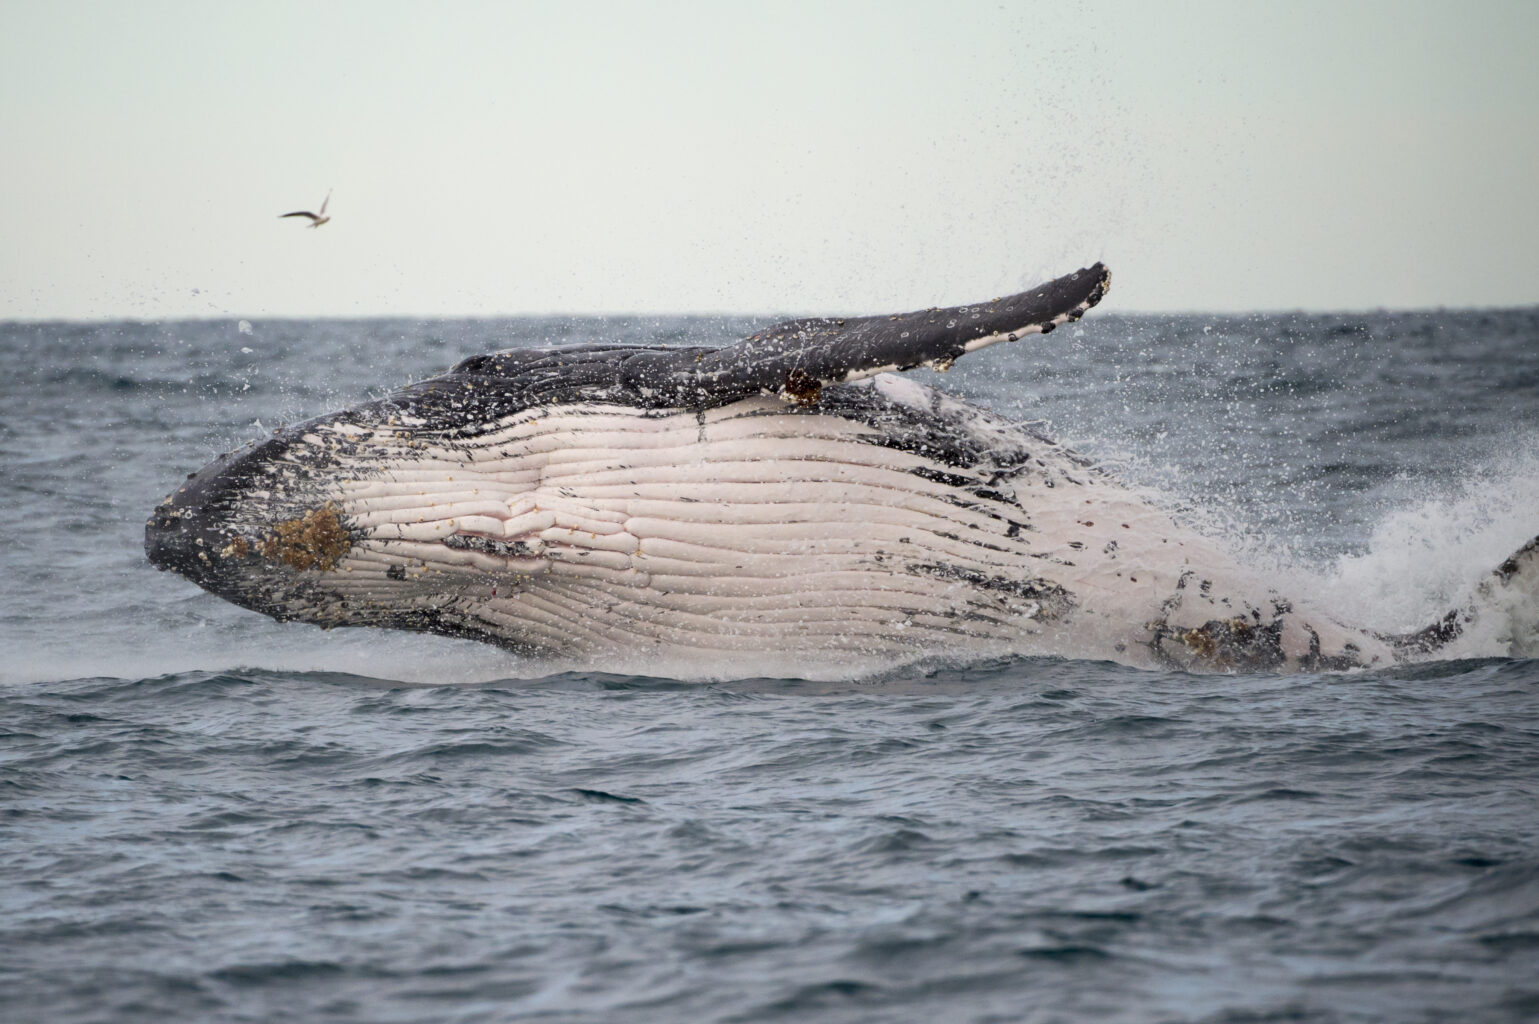 Whales on the Coffs Coast